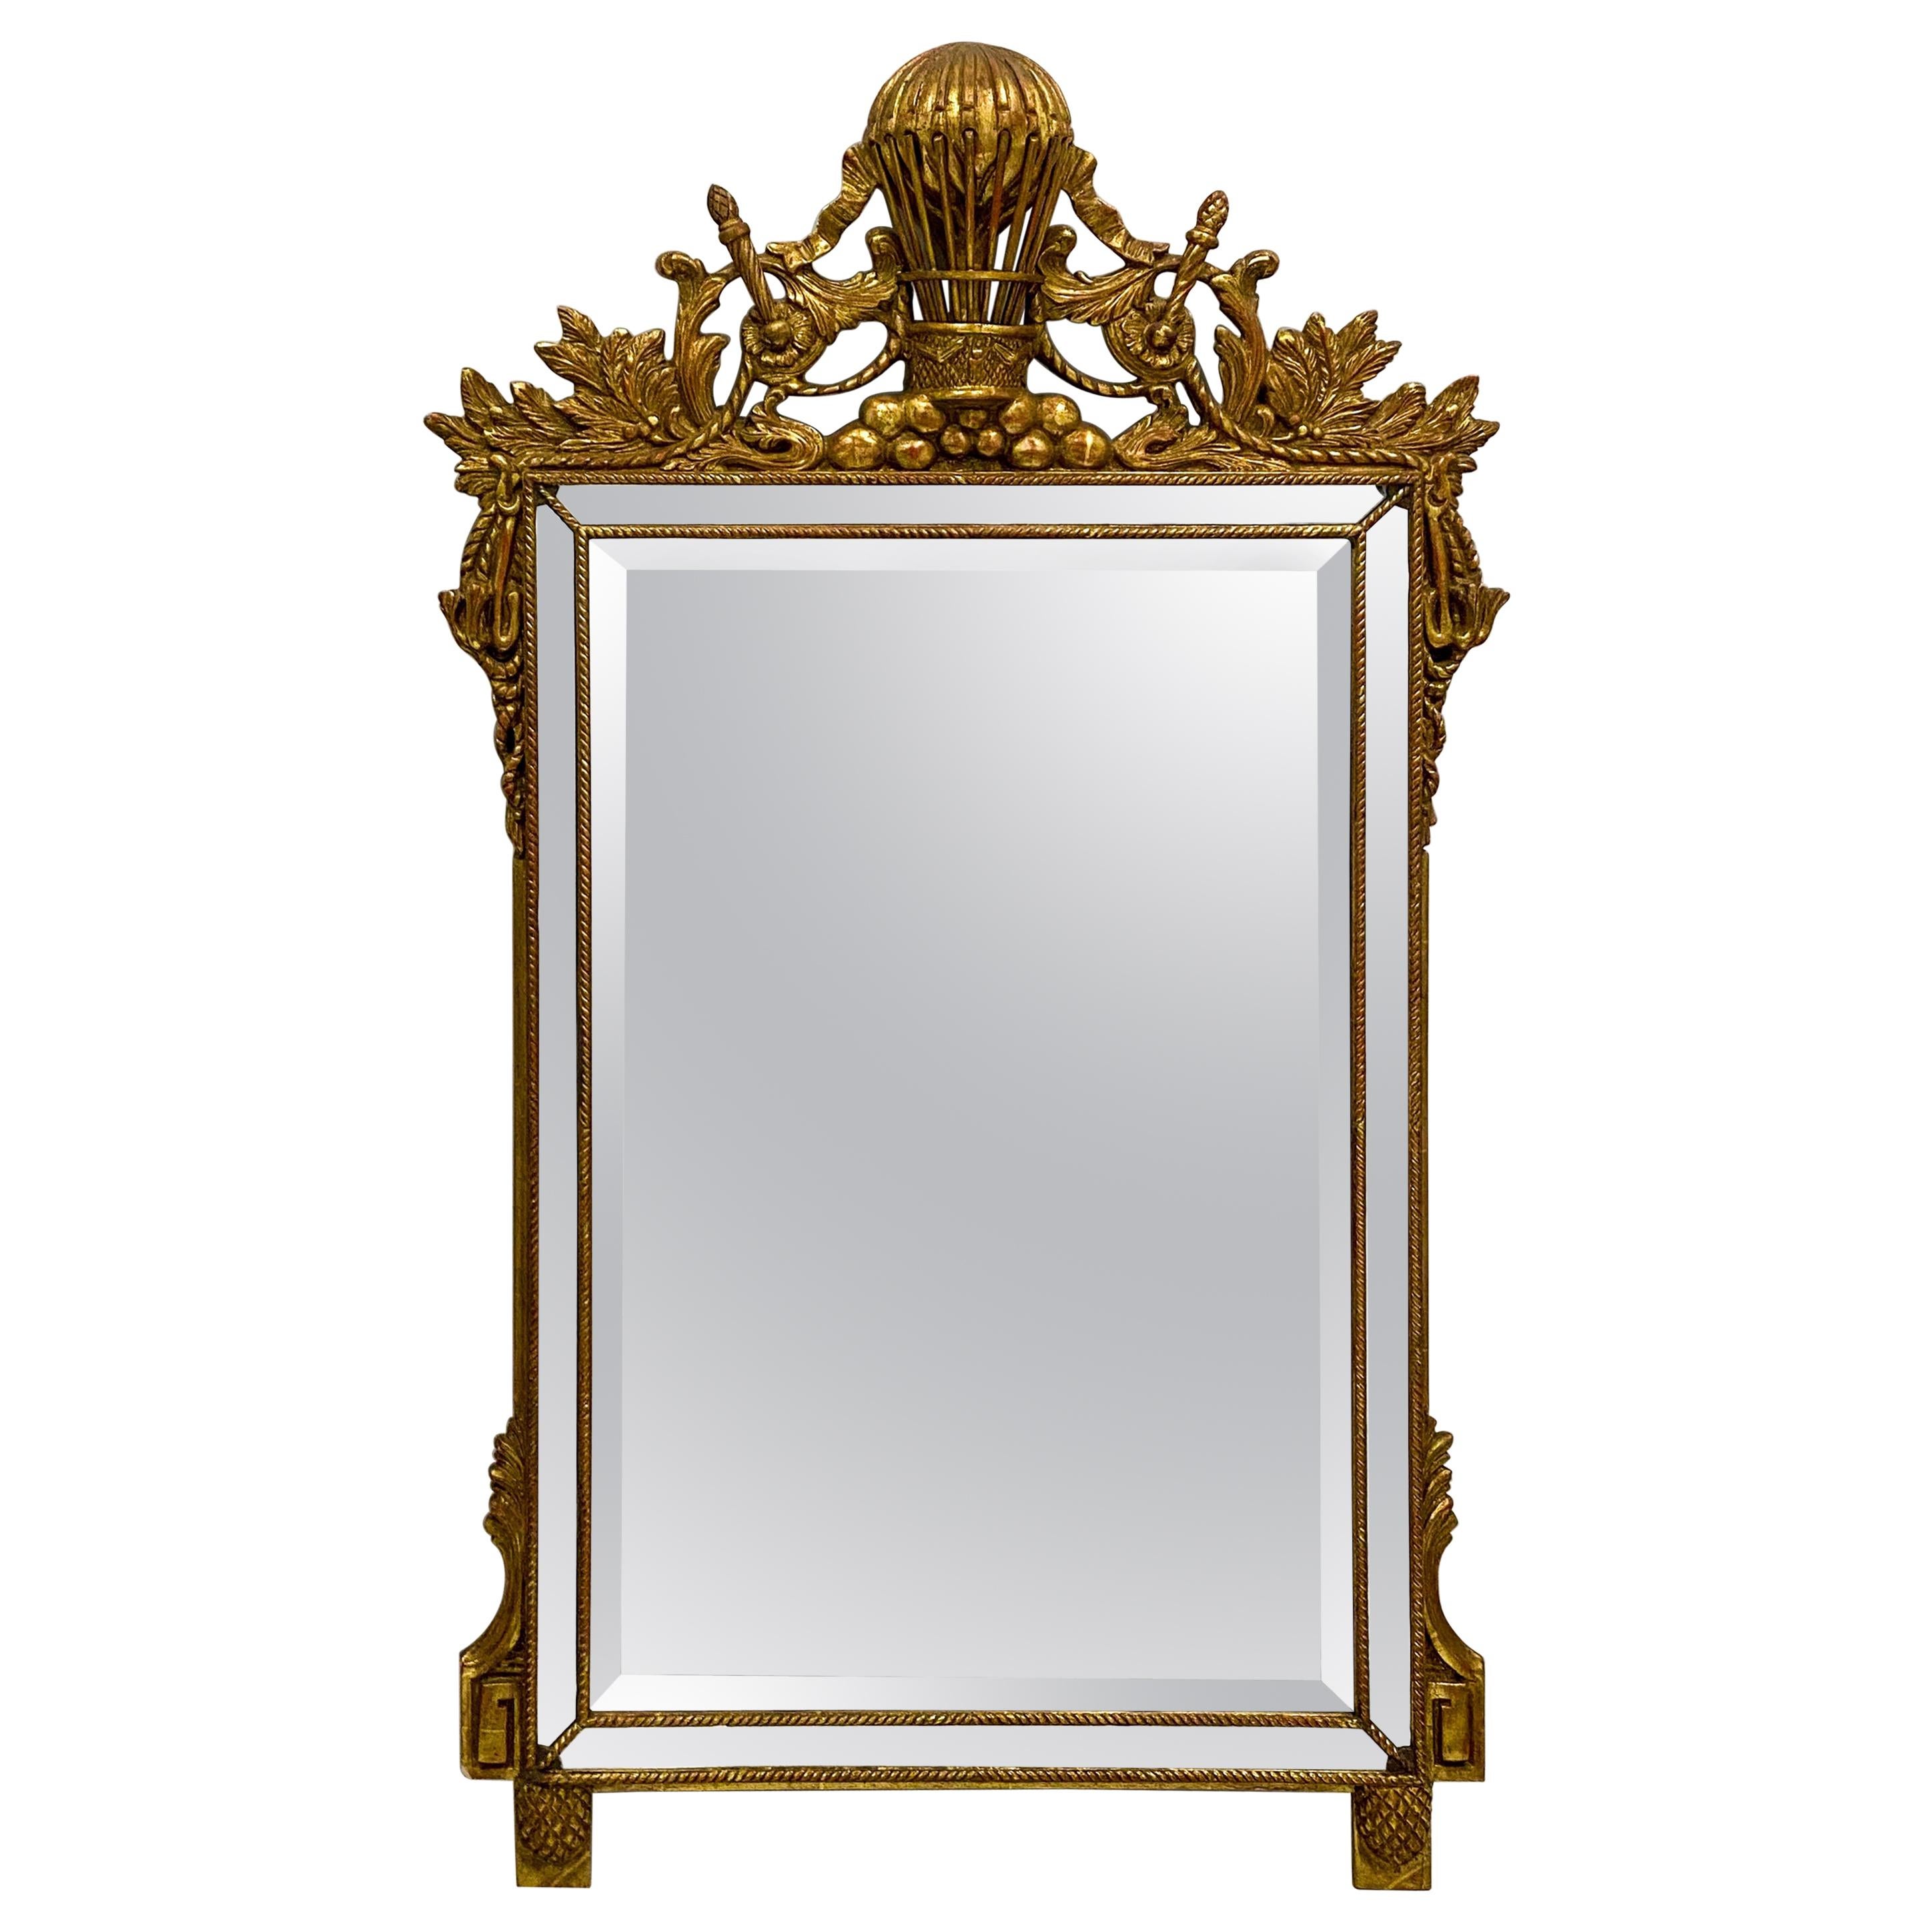 Midcentury French Napoleonic Themed Carved Giltwood Mirror For Sale